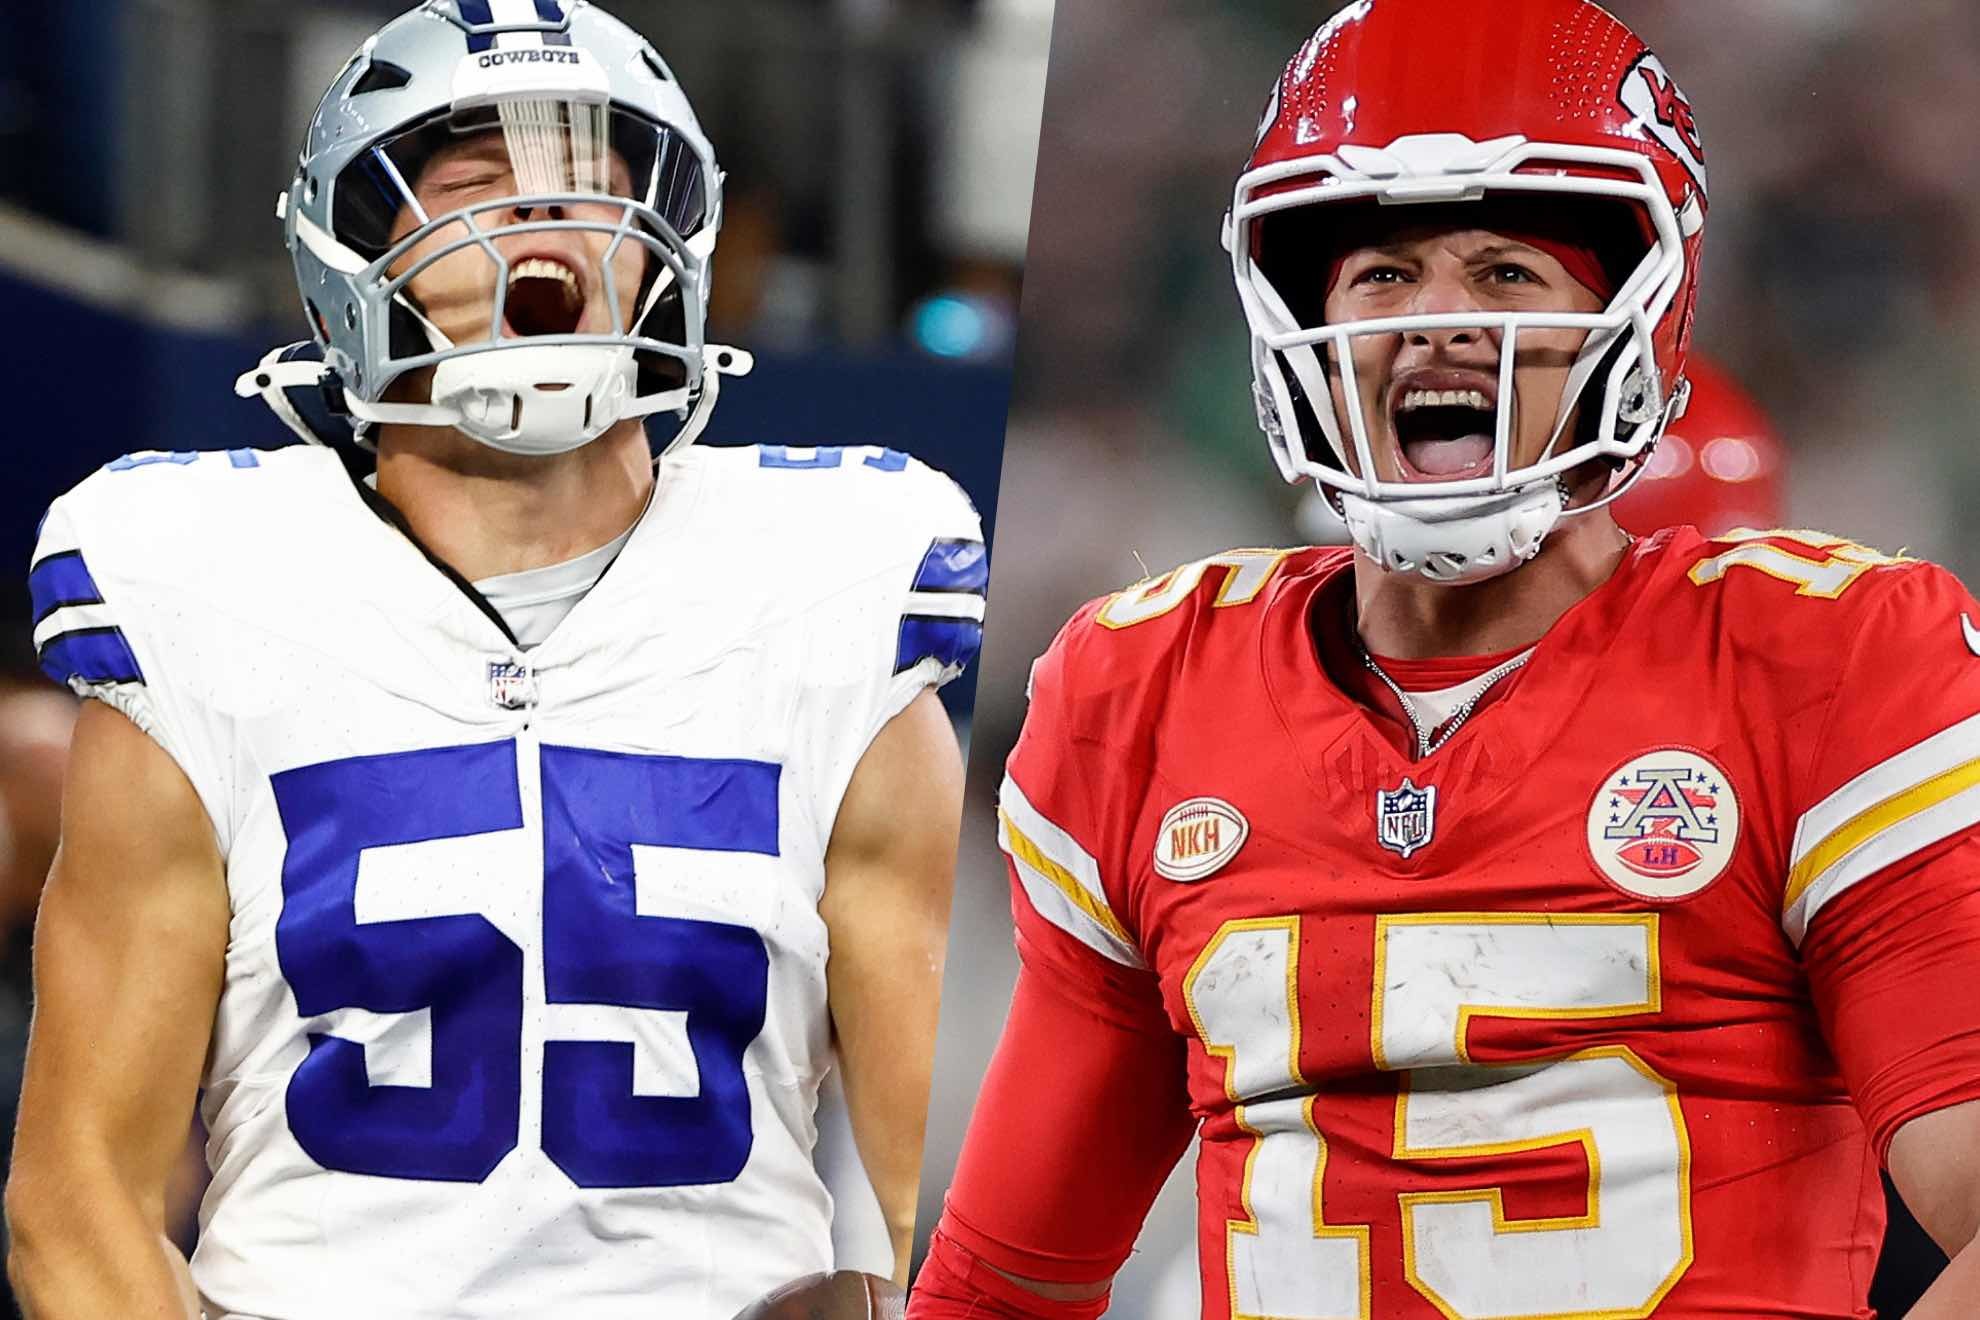 The Cowboys and Chiefs are teams to watch this week